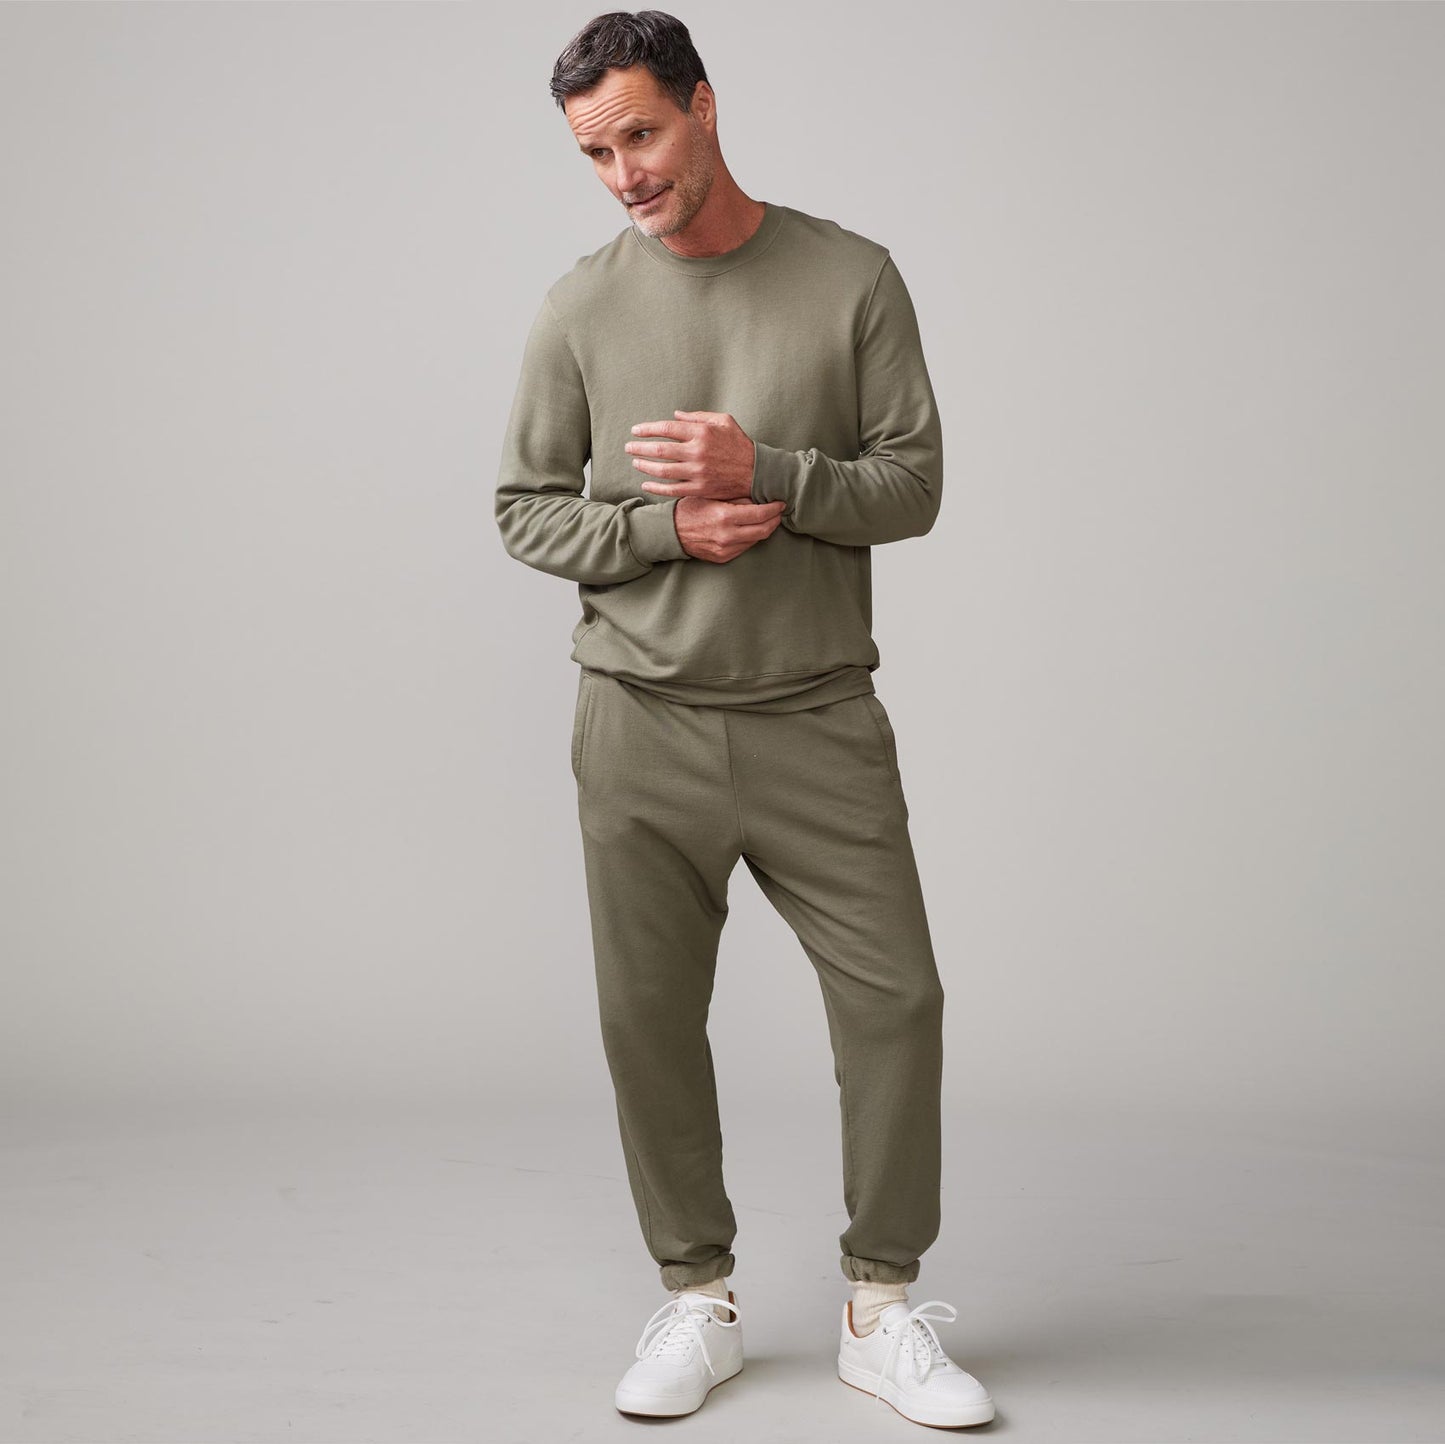 Front view of model wearing the lounge sweatshirt in army.